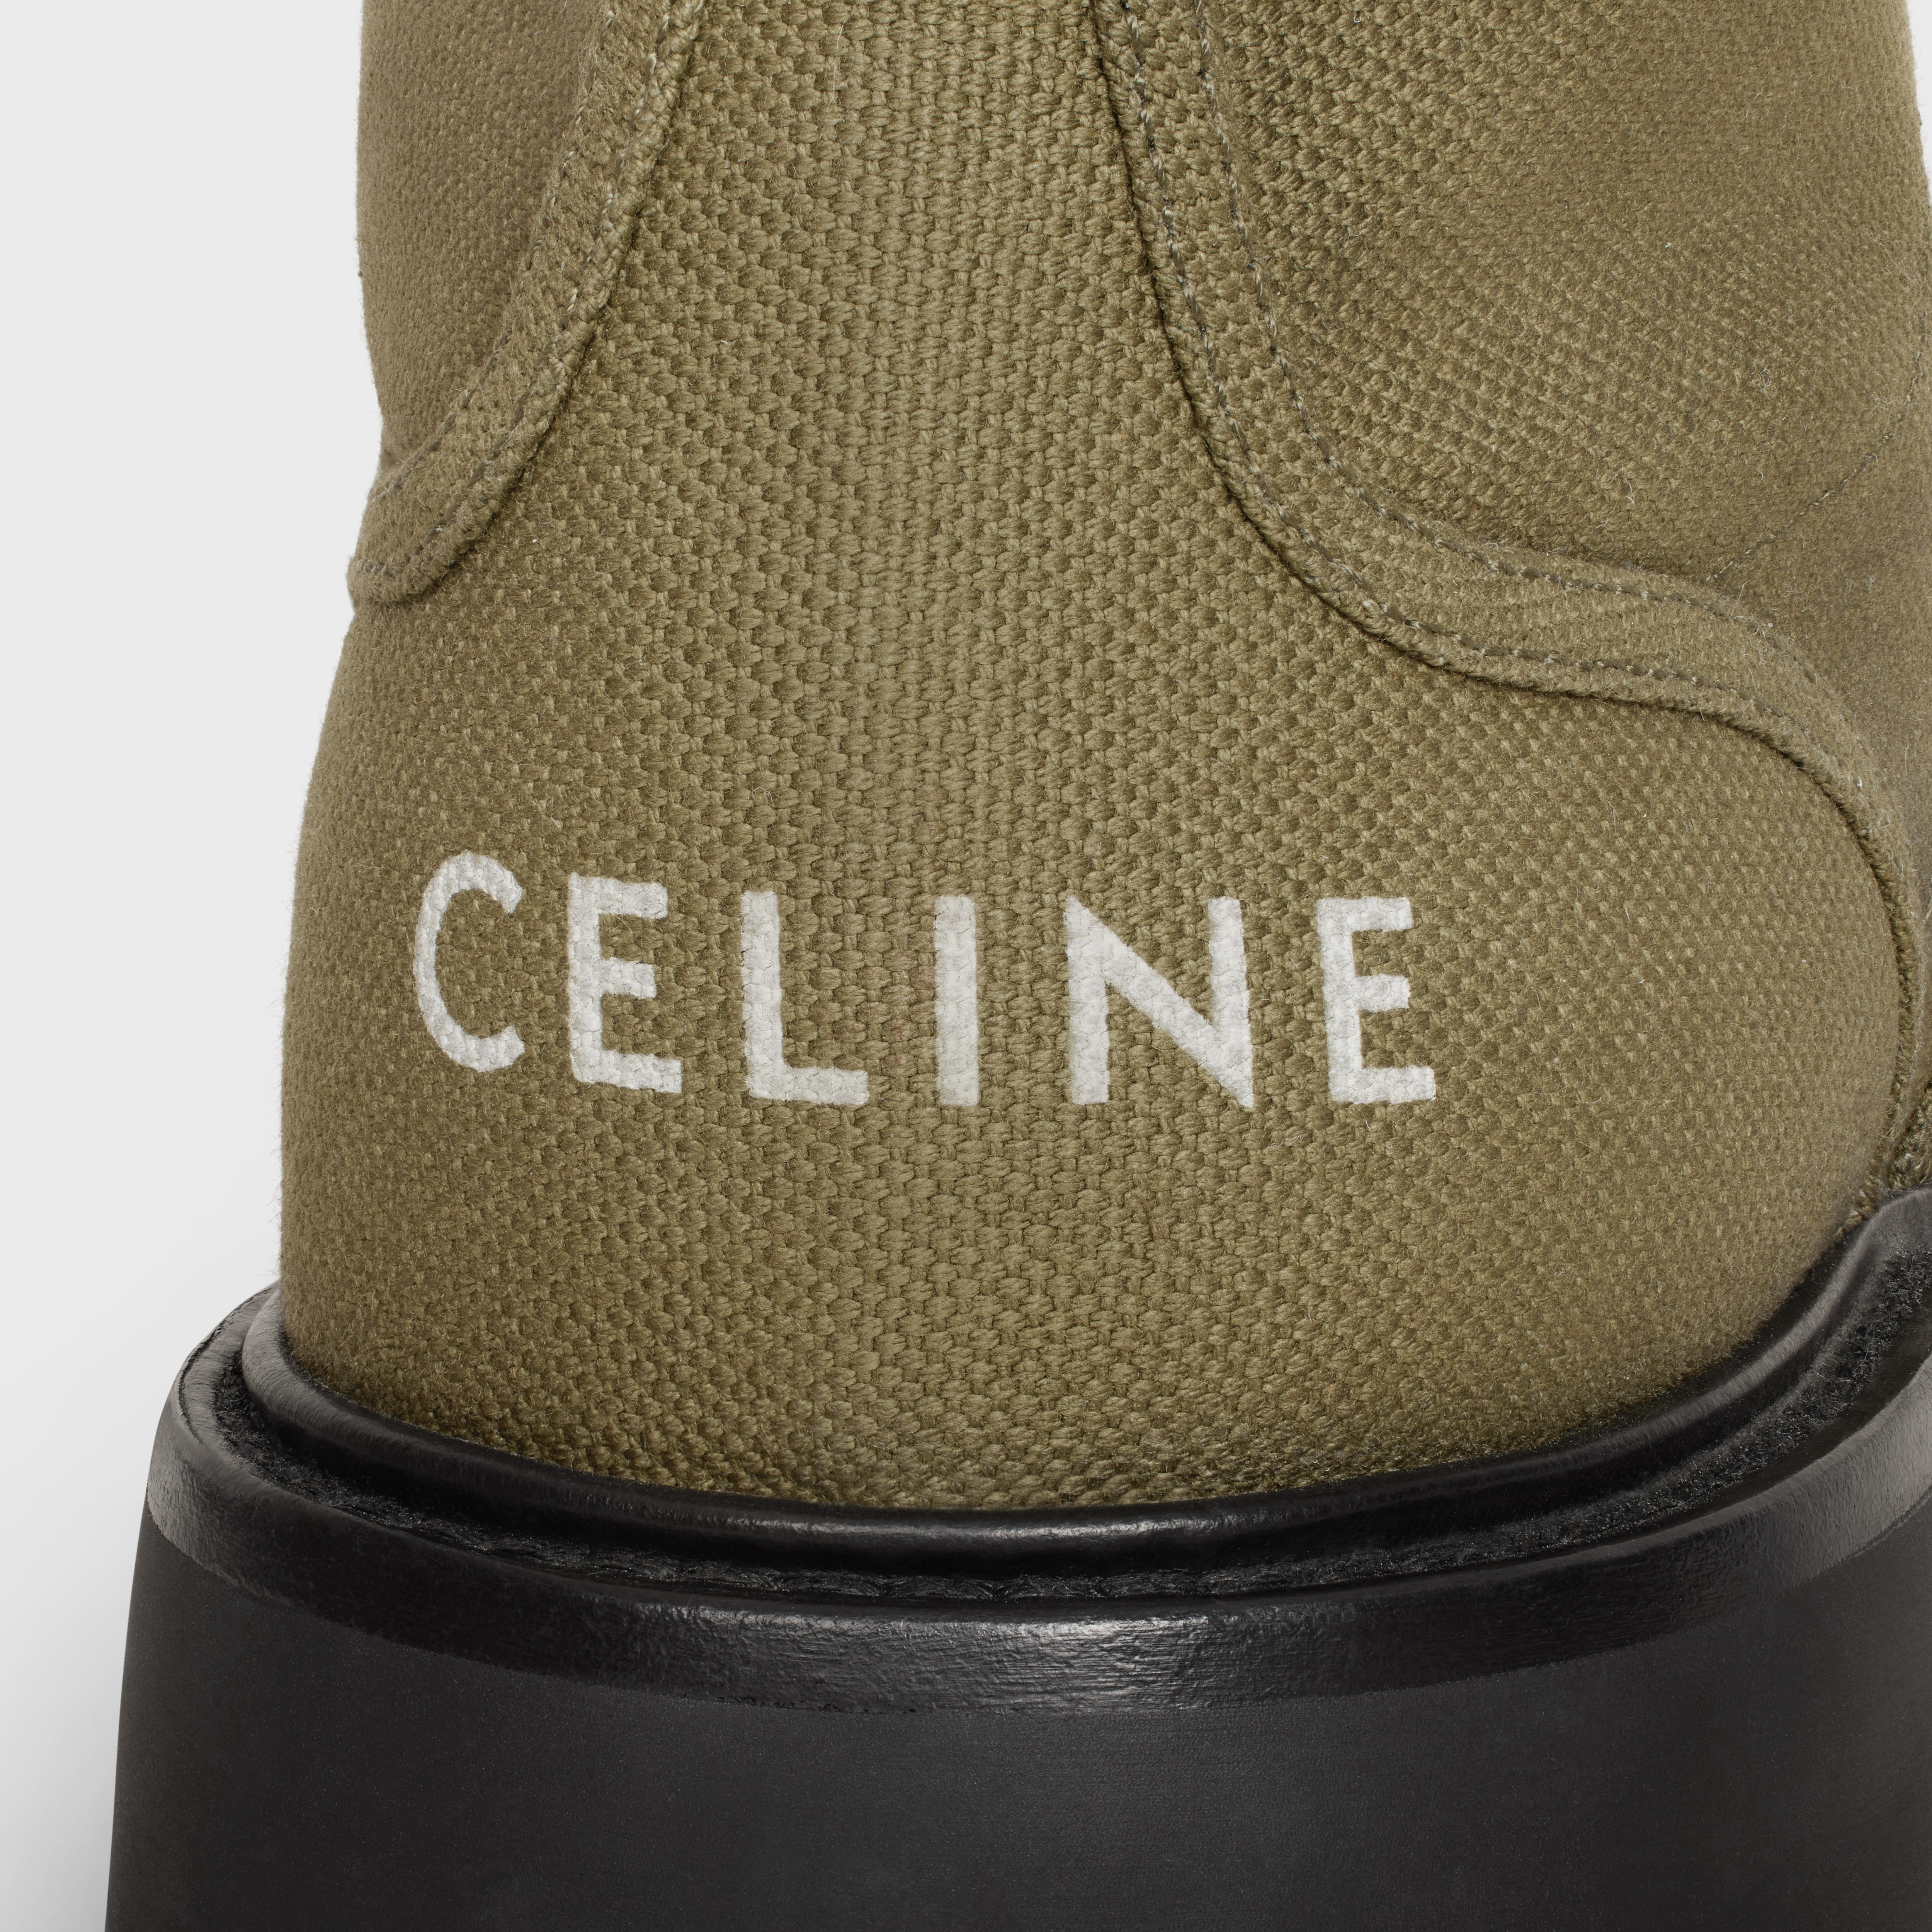 CELINE BULKY LACE-UP BOOTS in CANVAS AND SHINY BULLSKIN - 5